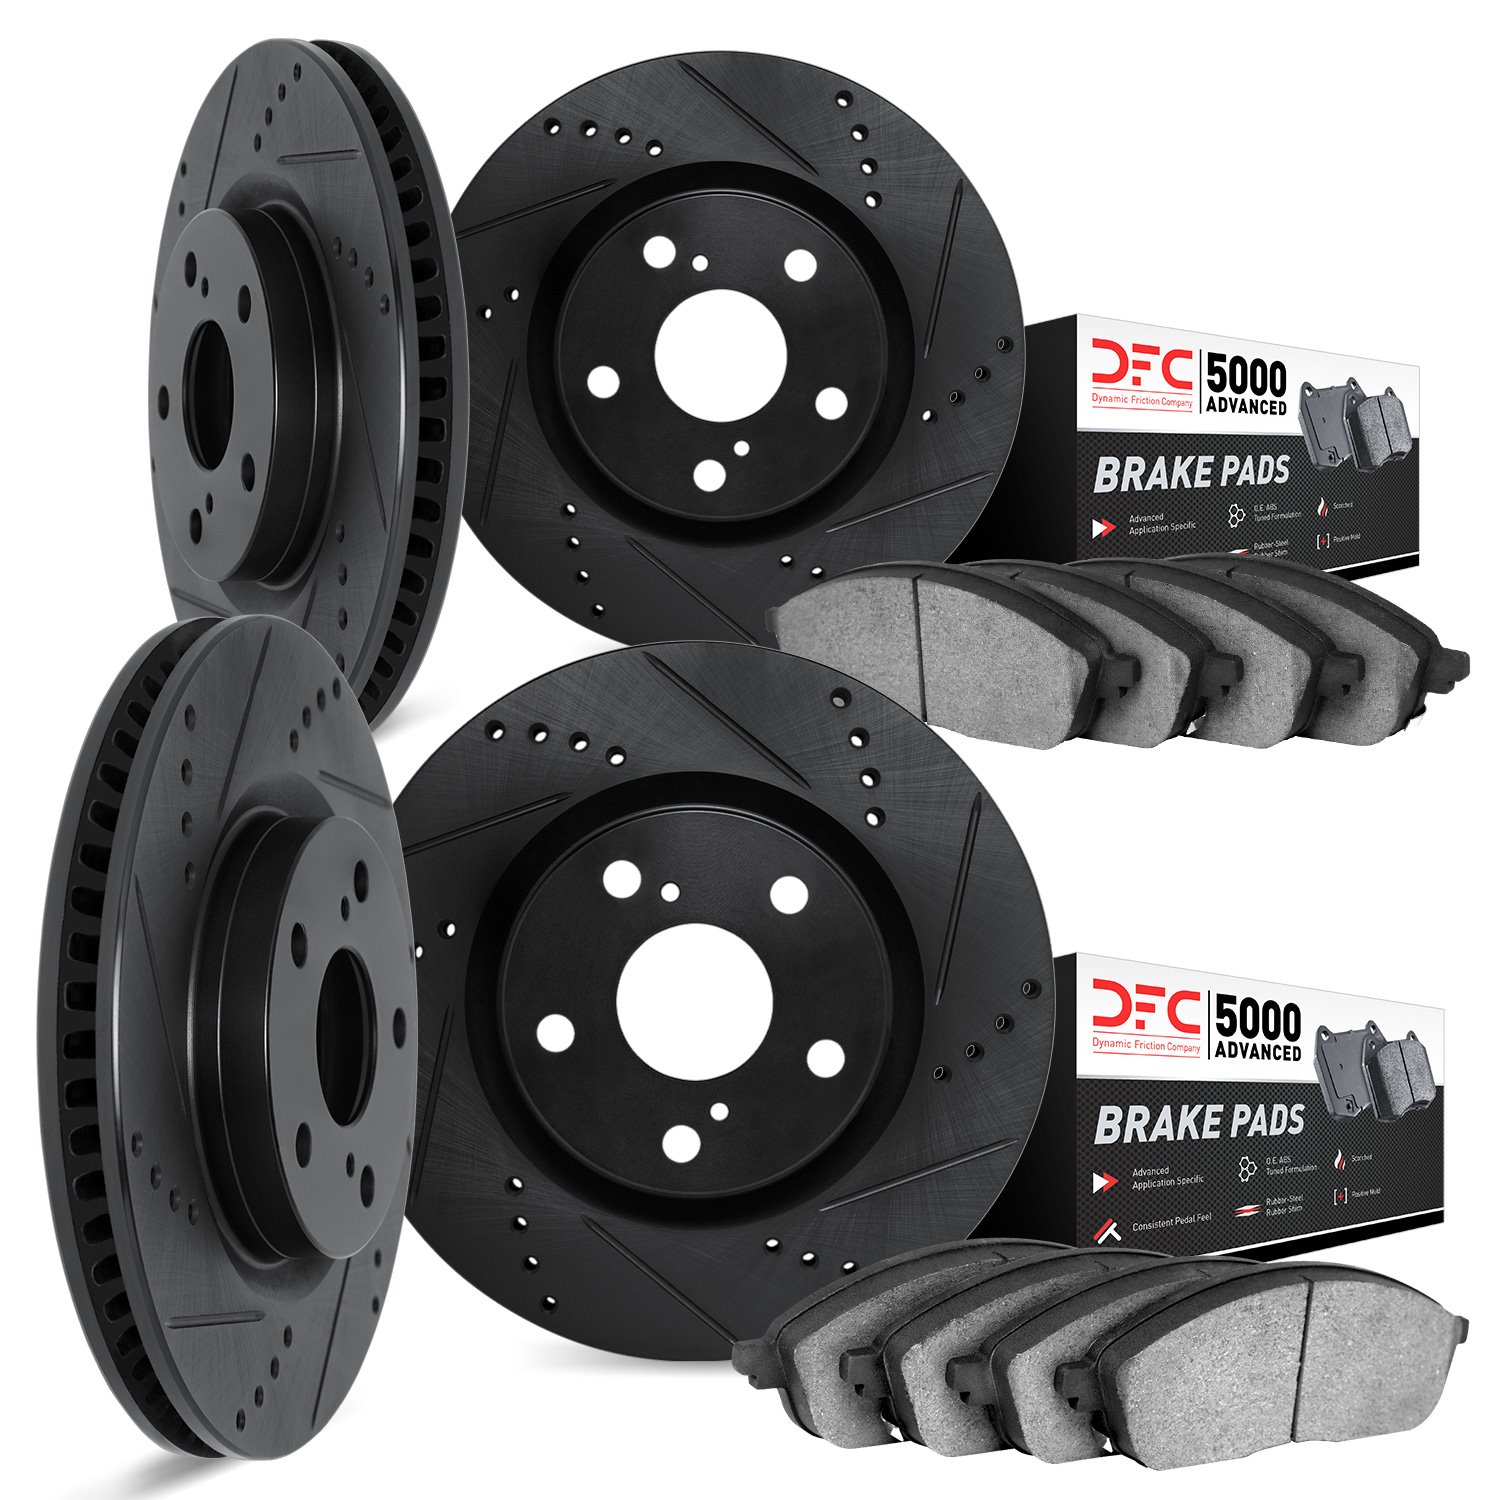 8504-39024 Drilled/Slotted Brake Rotors w/5000 Advanced Brake Pads Kit [Black], Fits Select Mopar, Position: Front and Rear